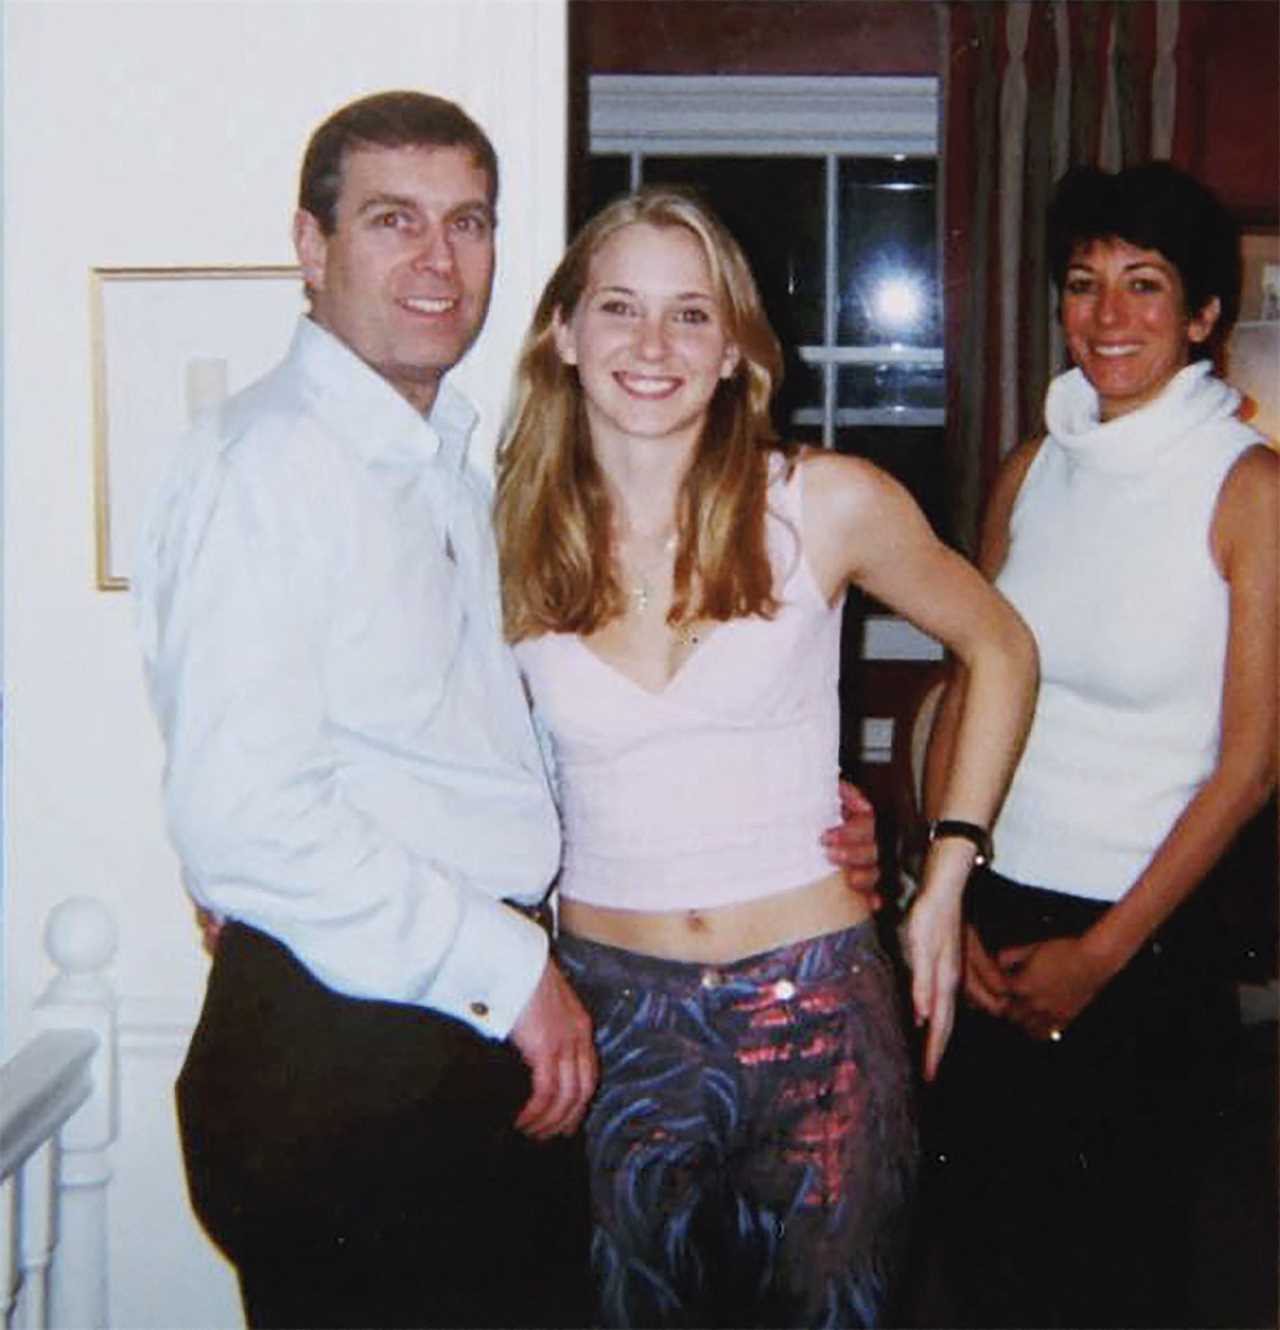 Jeffrey Epstein Allegedly Had Secret Sex Tapes of Prince Andrew, Richard Branson, and Bill Clinton, According to Unsealed Documents